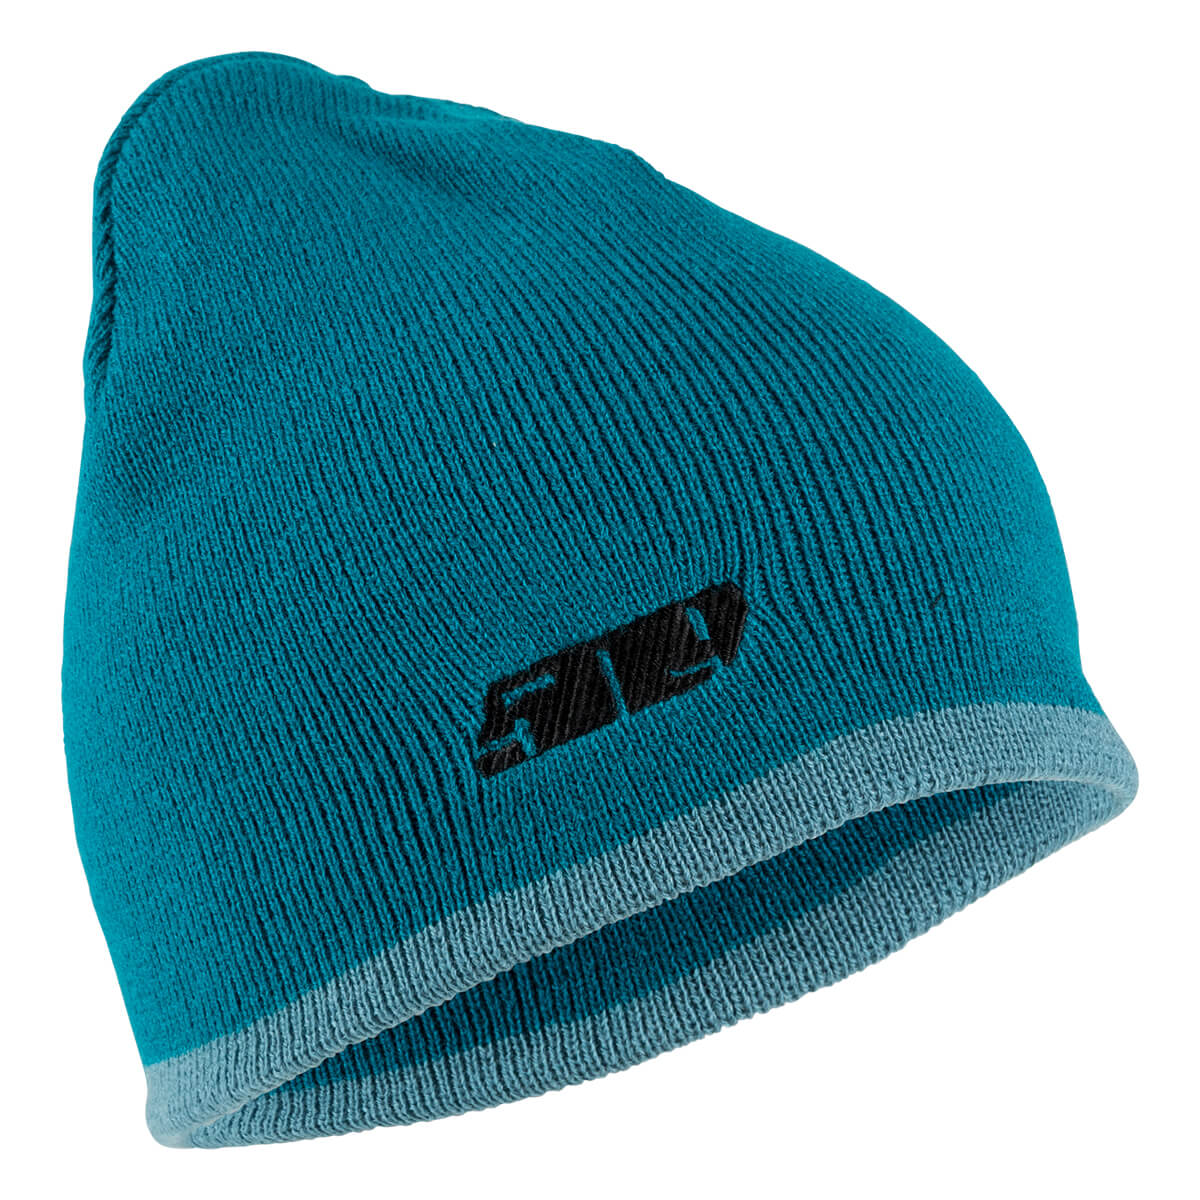 Reversible Beanie - F09002300 - The Parts Lodge